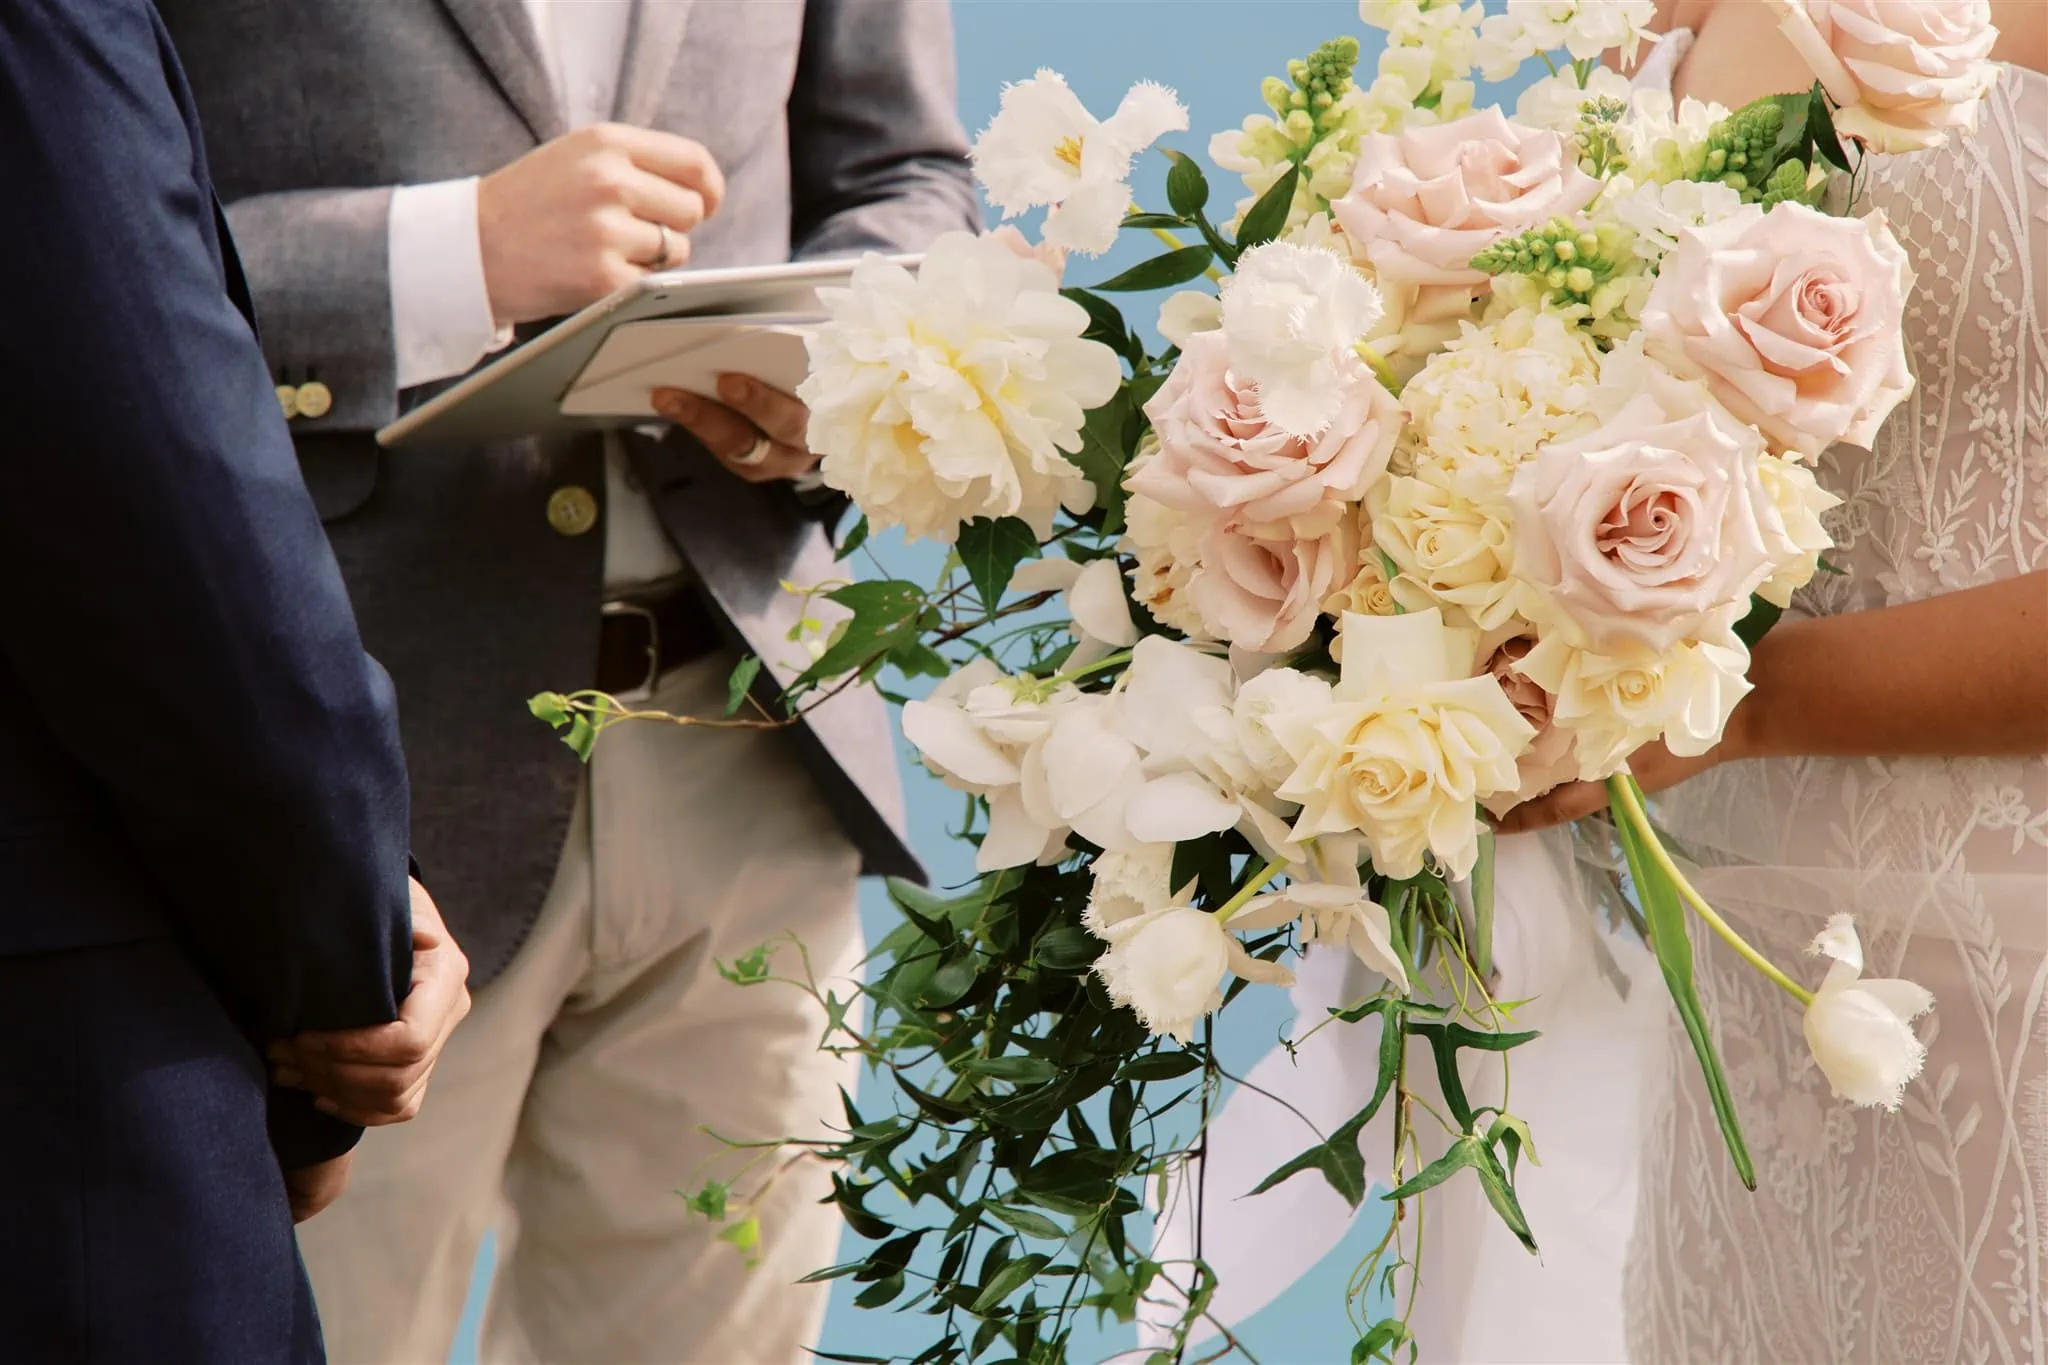 Queenstown Elopement Heli Wedding Photographer クイーンズタウン結婚式 | Mariah and Cliff share heartfelt vows during their Queenstown elopement ceremony, surrounded by a stunning bouquet of flowers.